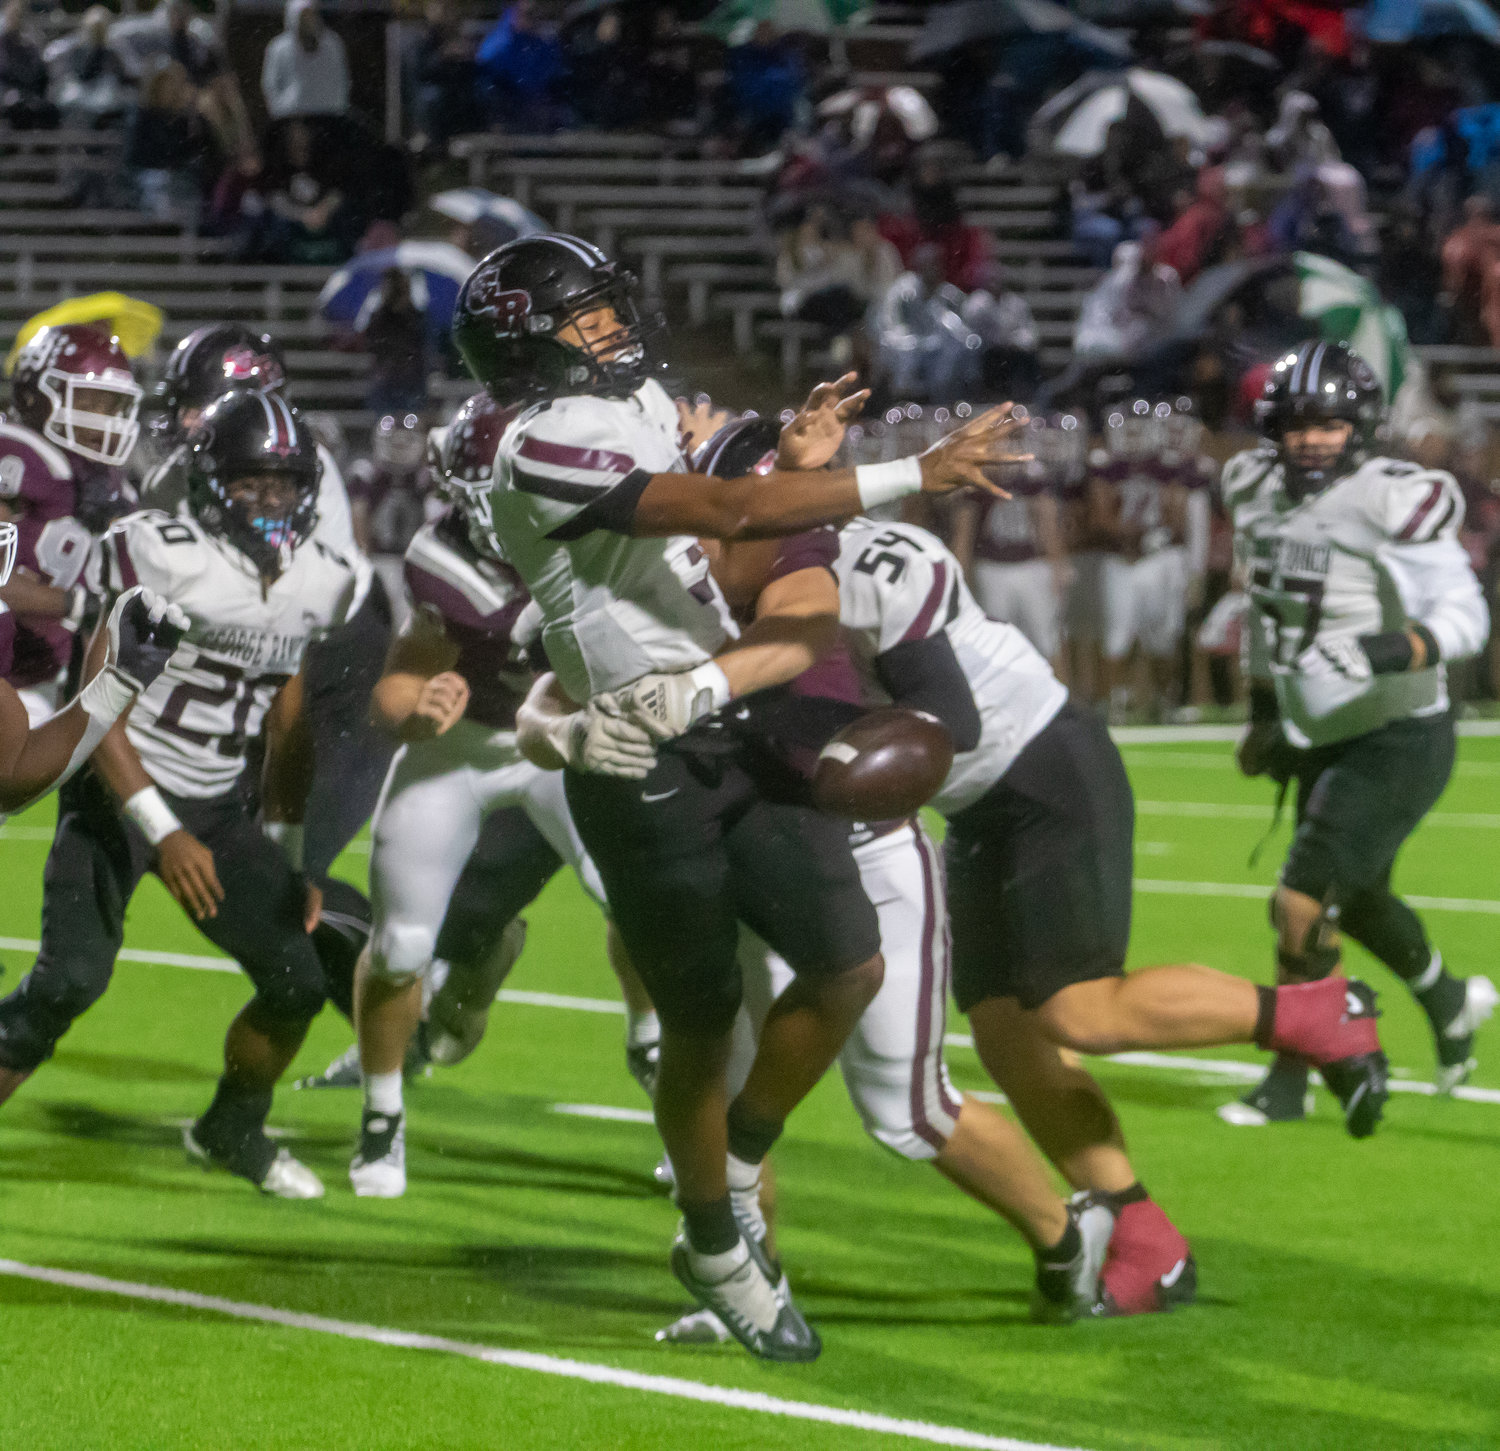 Cinco Ranch's defense forces a fumble during Friday's game between Cinco Ranch and George Ranch at Rhodes Stadium.